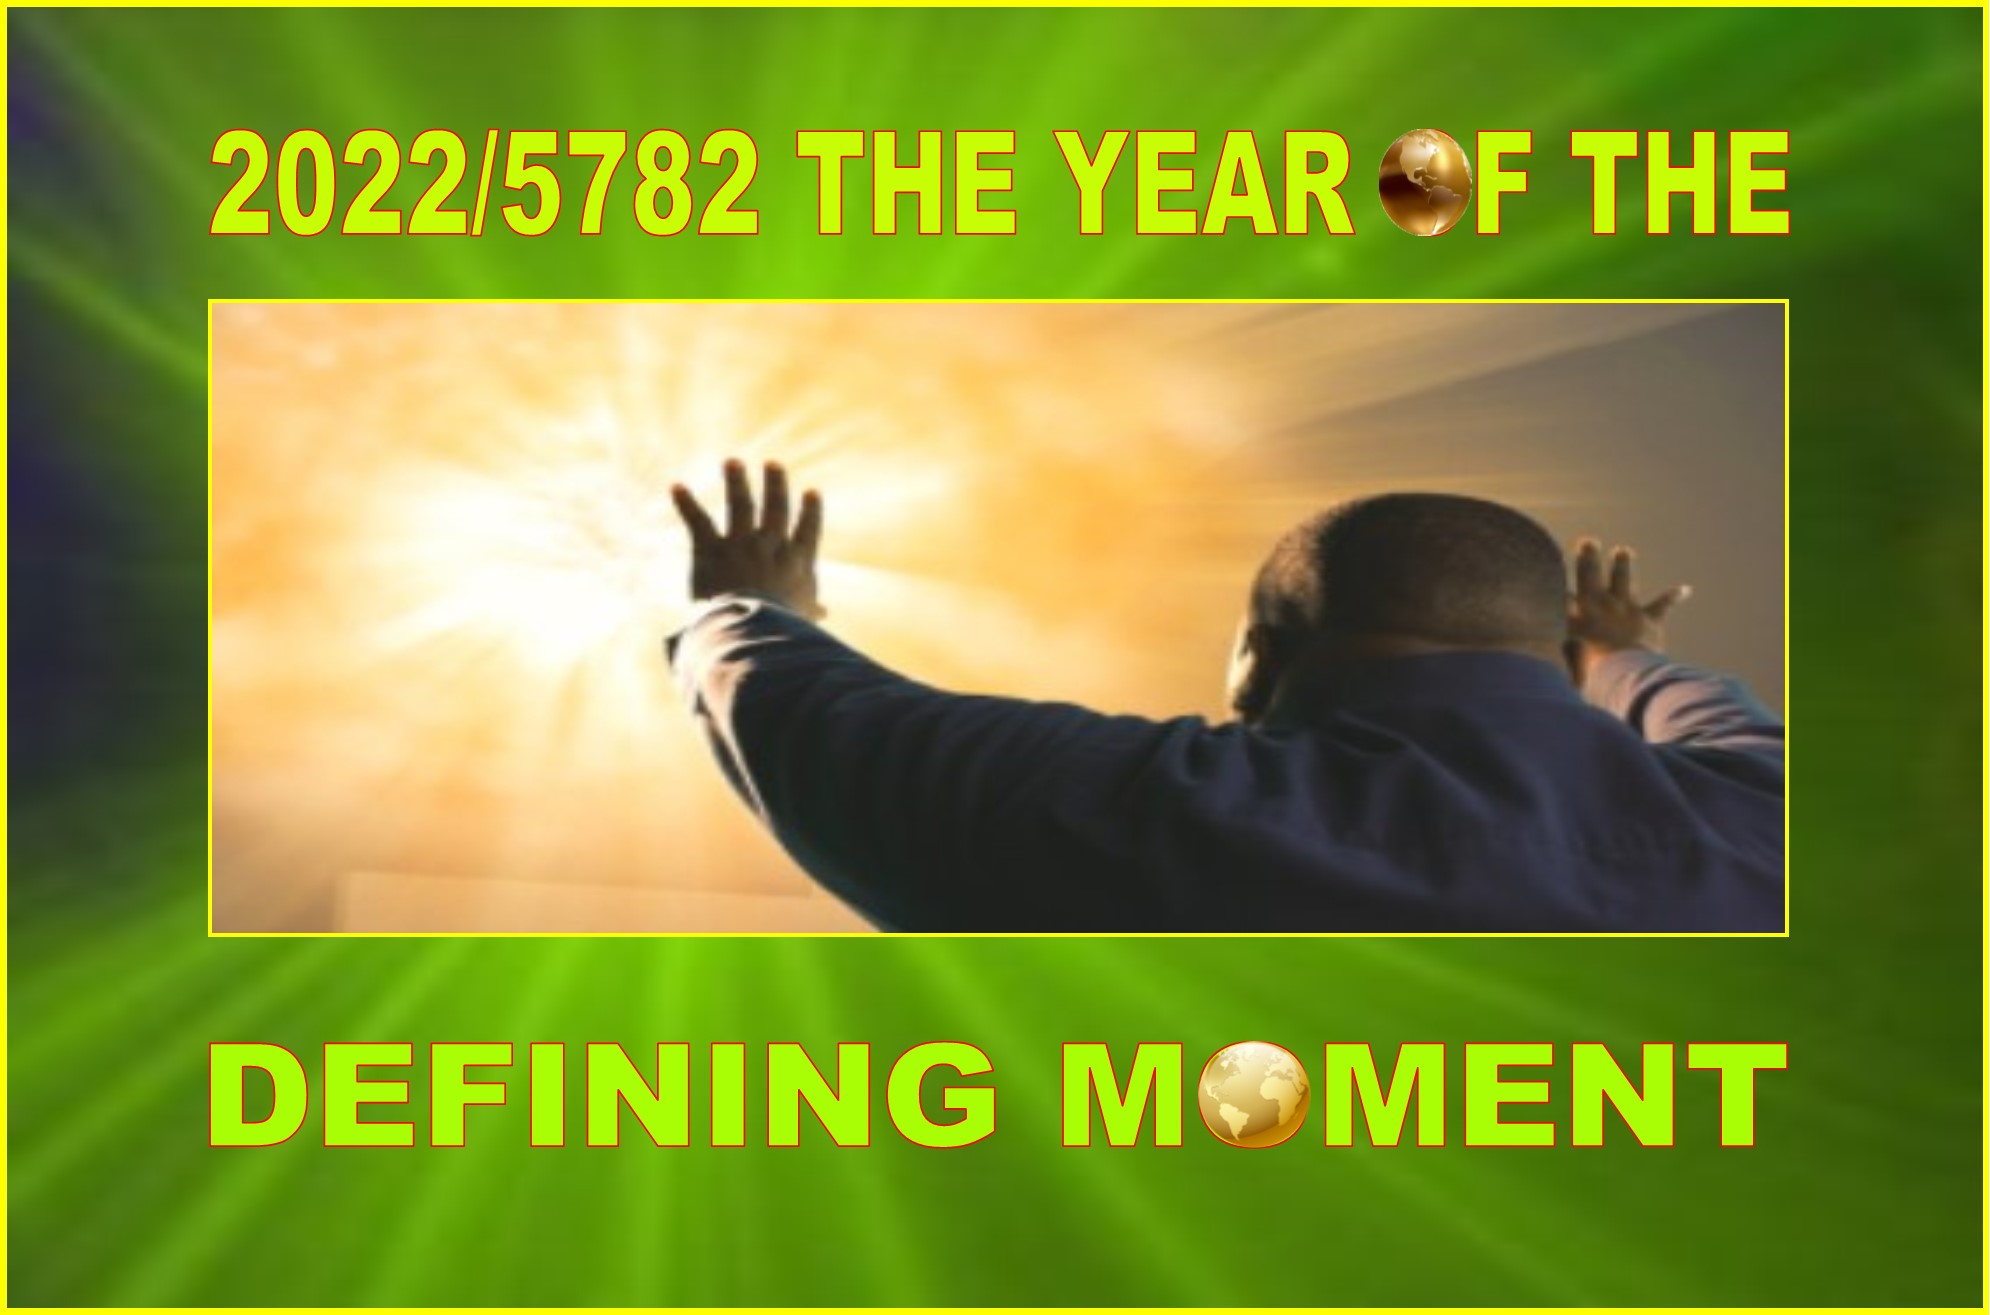 2022-5782 THE YEAR OF THE DEFINING MOMENT WEBSITE HEADER AND LOGO 11-11-2021